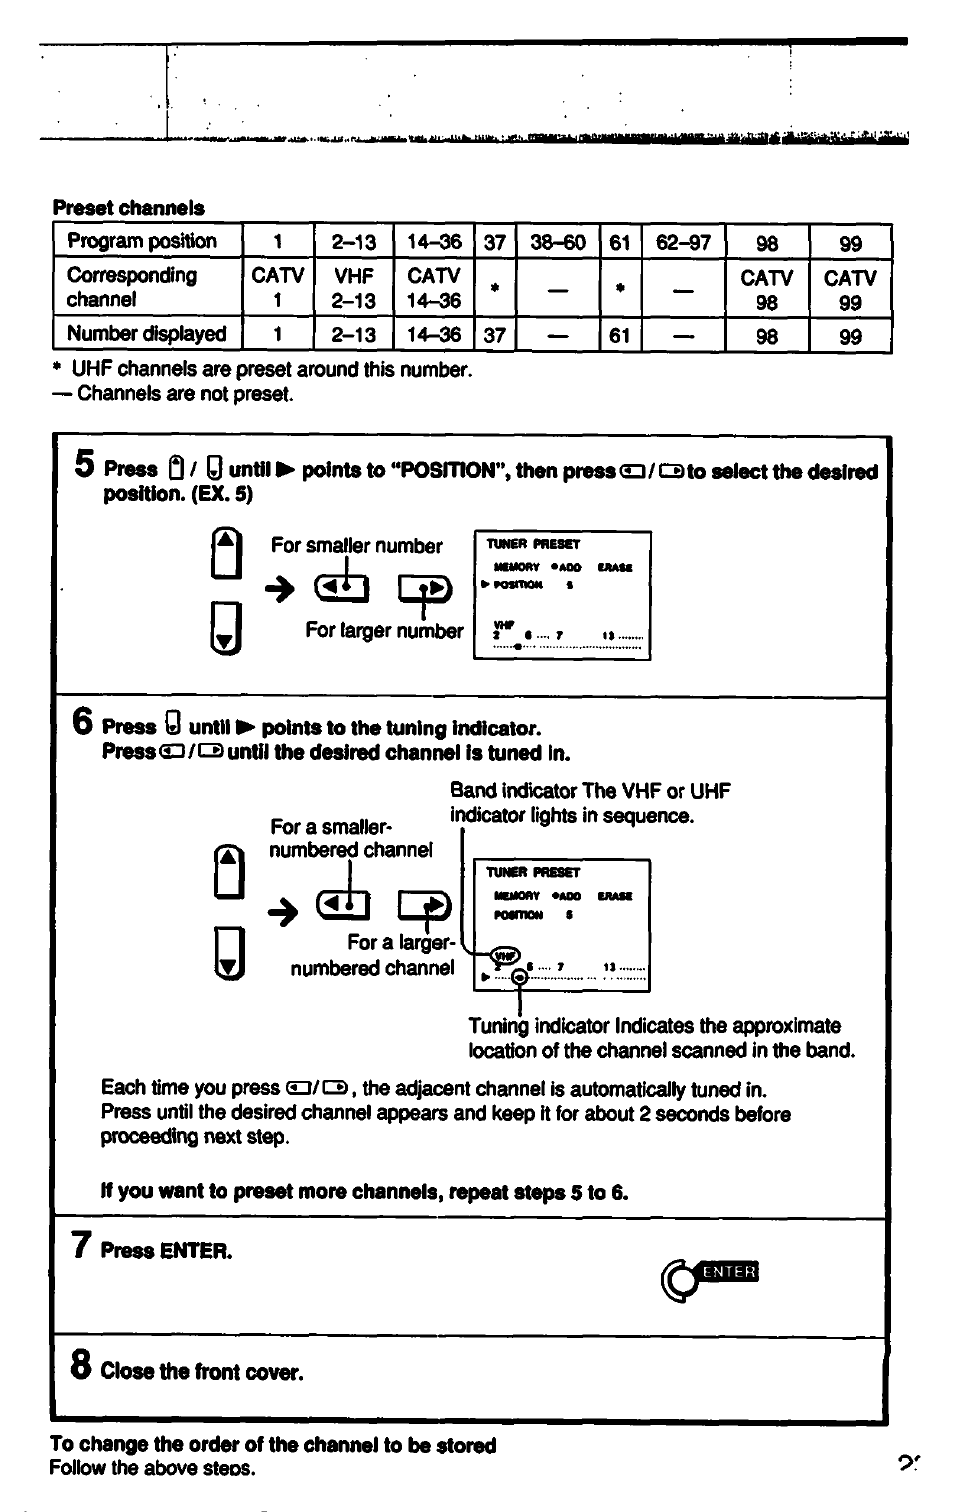 1 ciid, 8 close the front | Sony GV-500 User Manual | Page 23 / 84